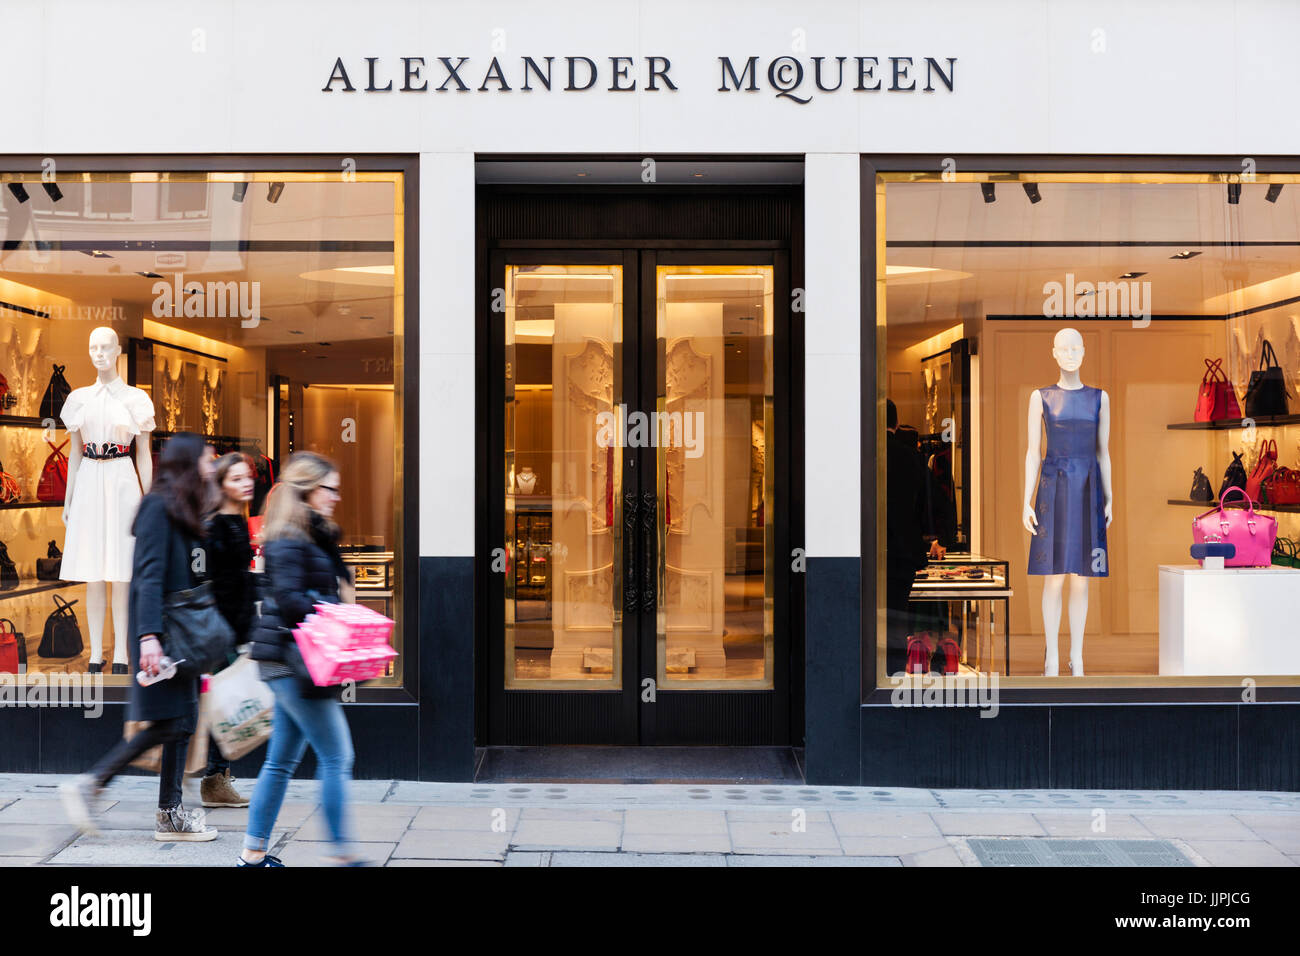 London: New Alexander McQueen store challenges the shopping experience –  HauteDyssey